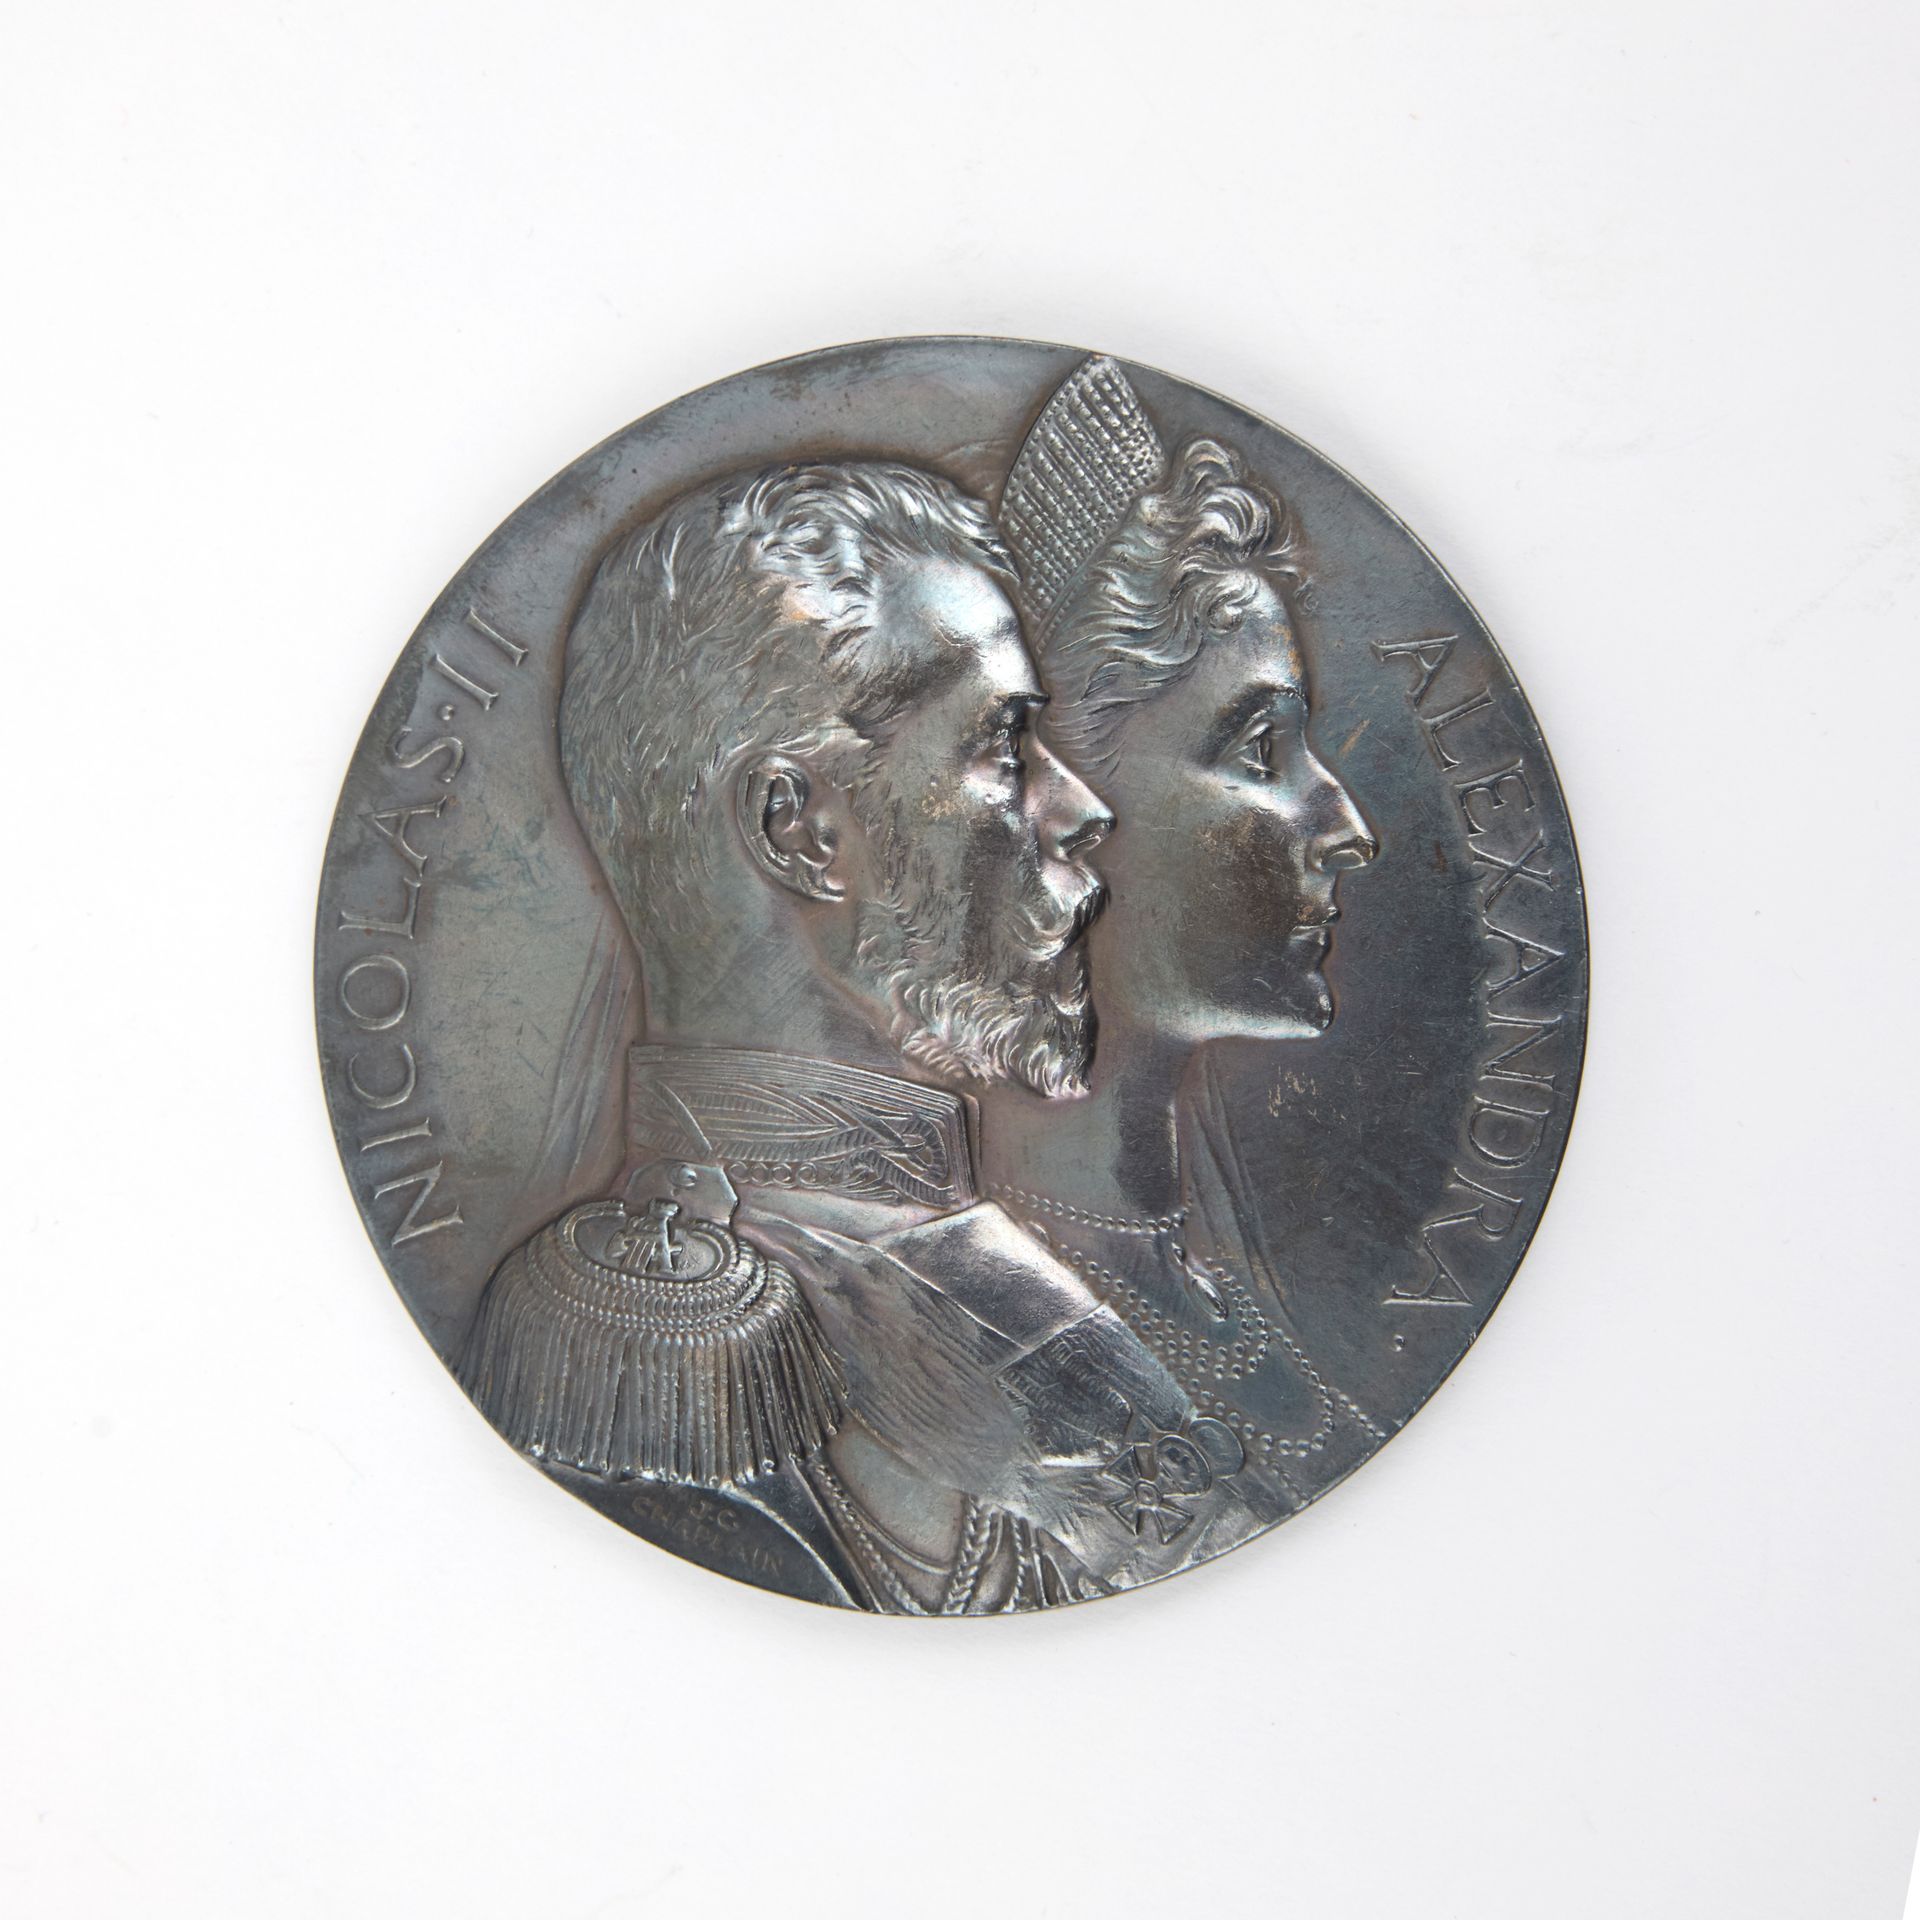 Null [FRANCO-RUSSIAN ALLIANCE]
Rare silver medal engraved by Jules Clément Chapl&hellip;